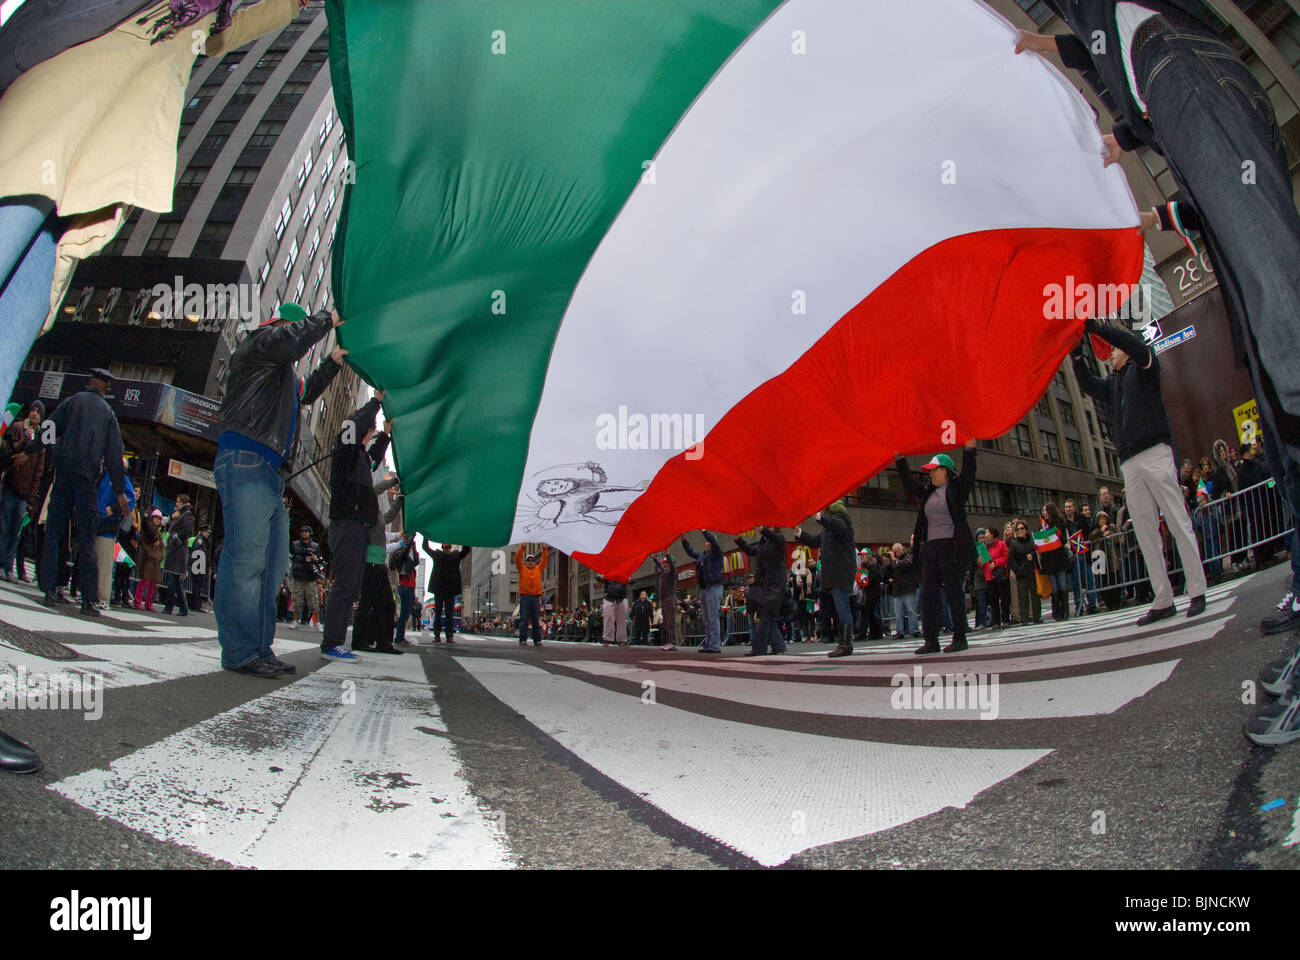 Iranian-Americans and supporters at the annual Persian Parade on Madison Ave. in New York Stock Photo